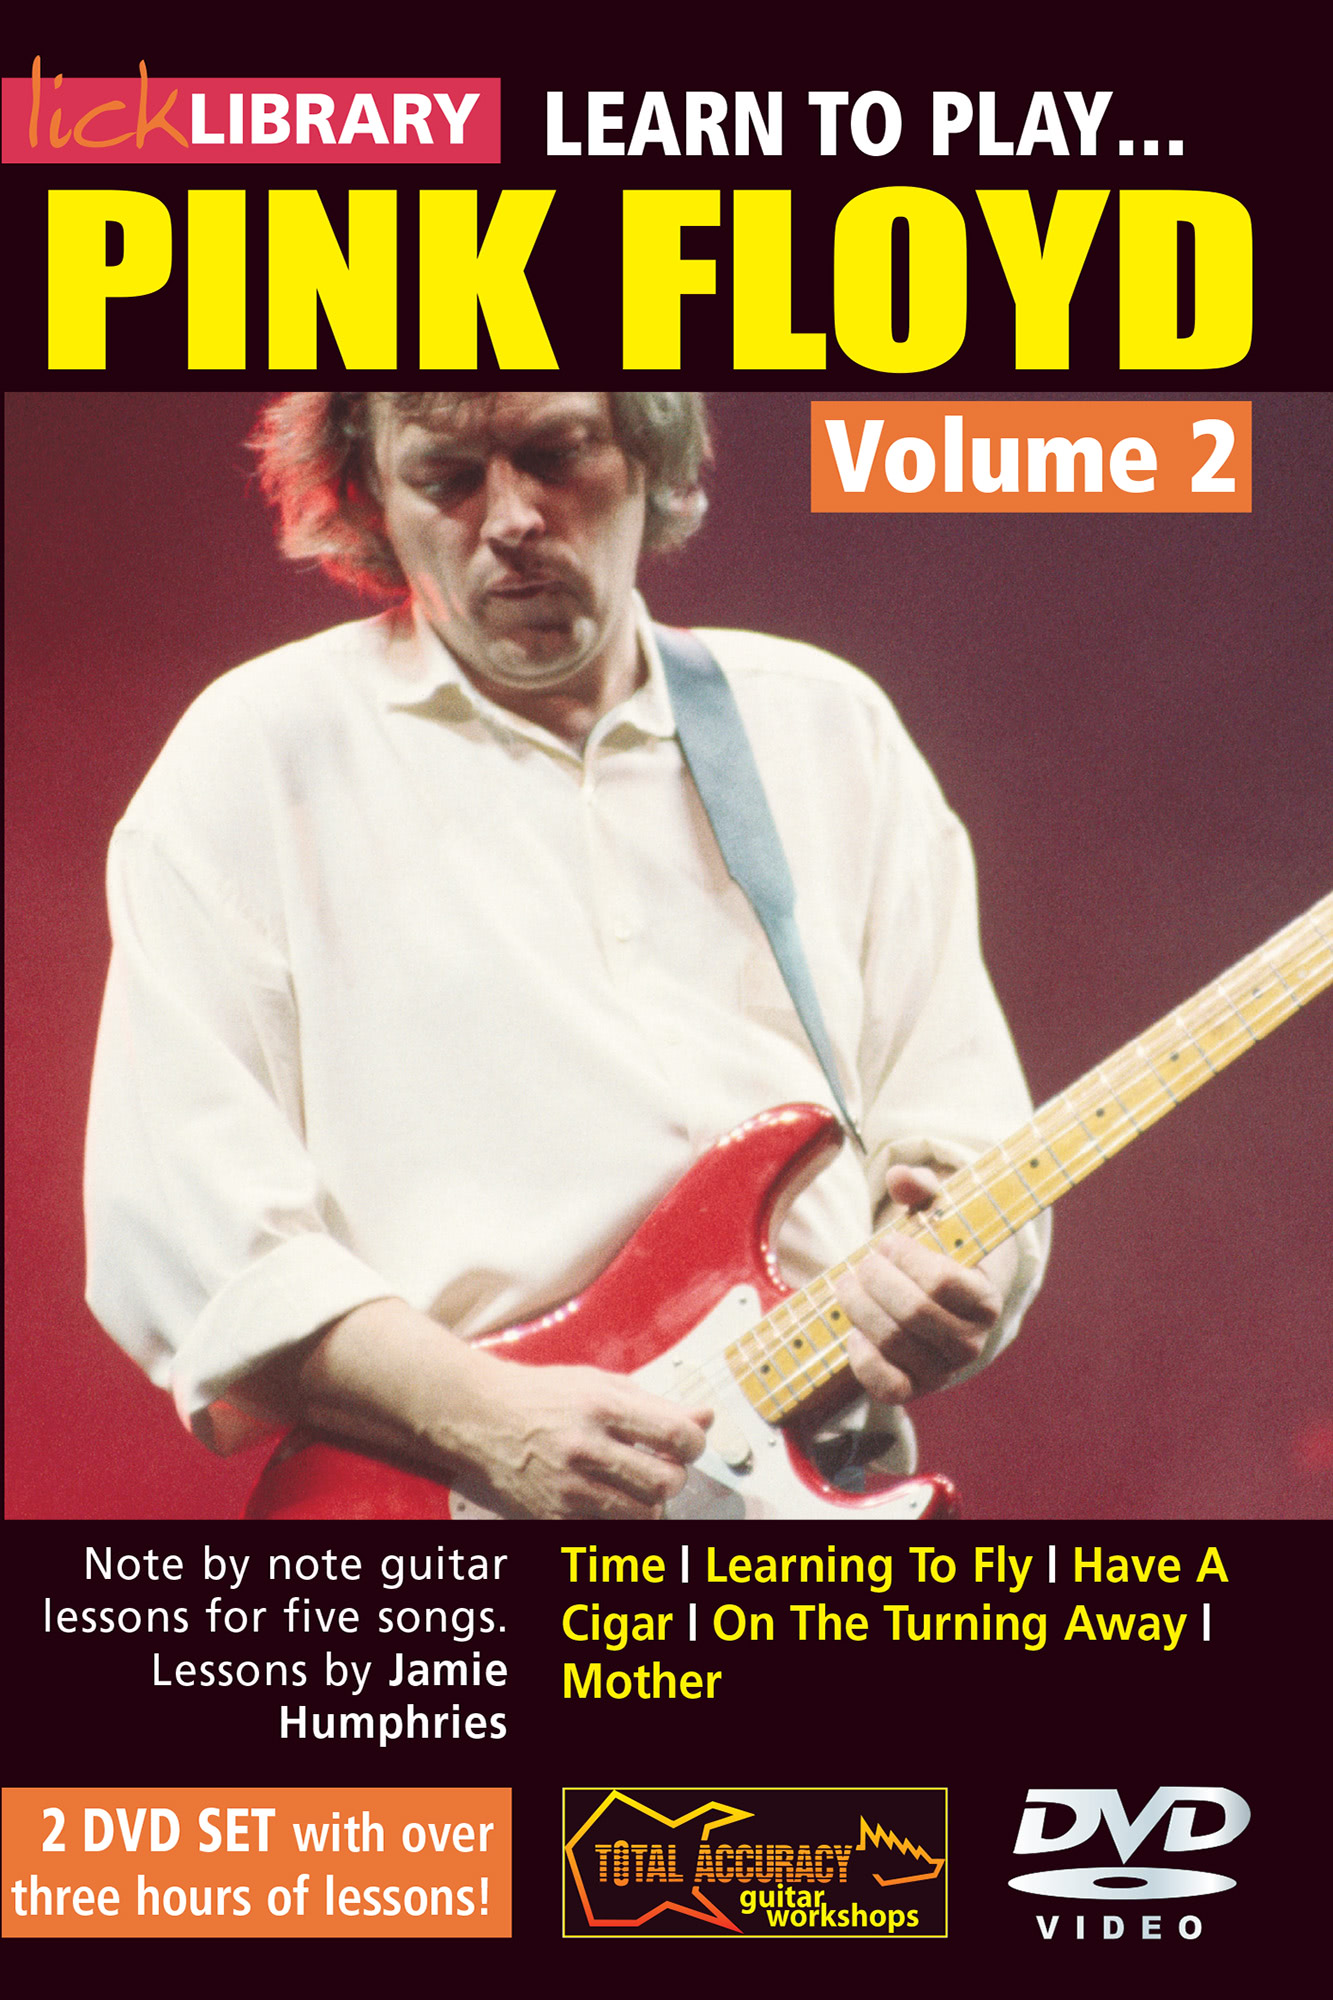 Learn To Play Pink Floyd Volume 2